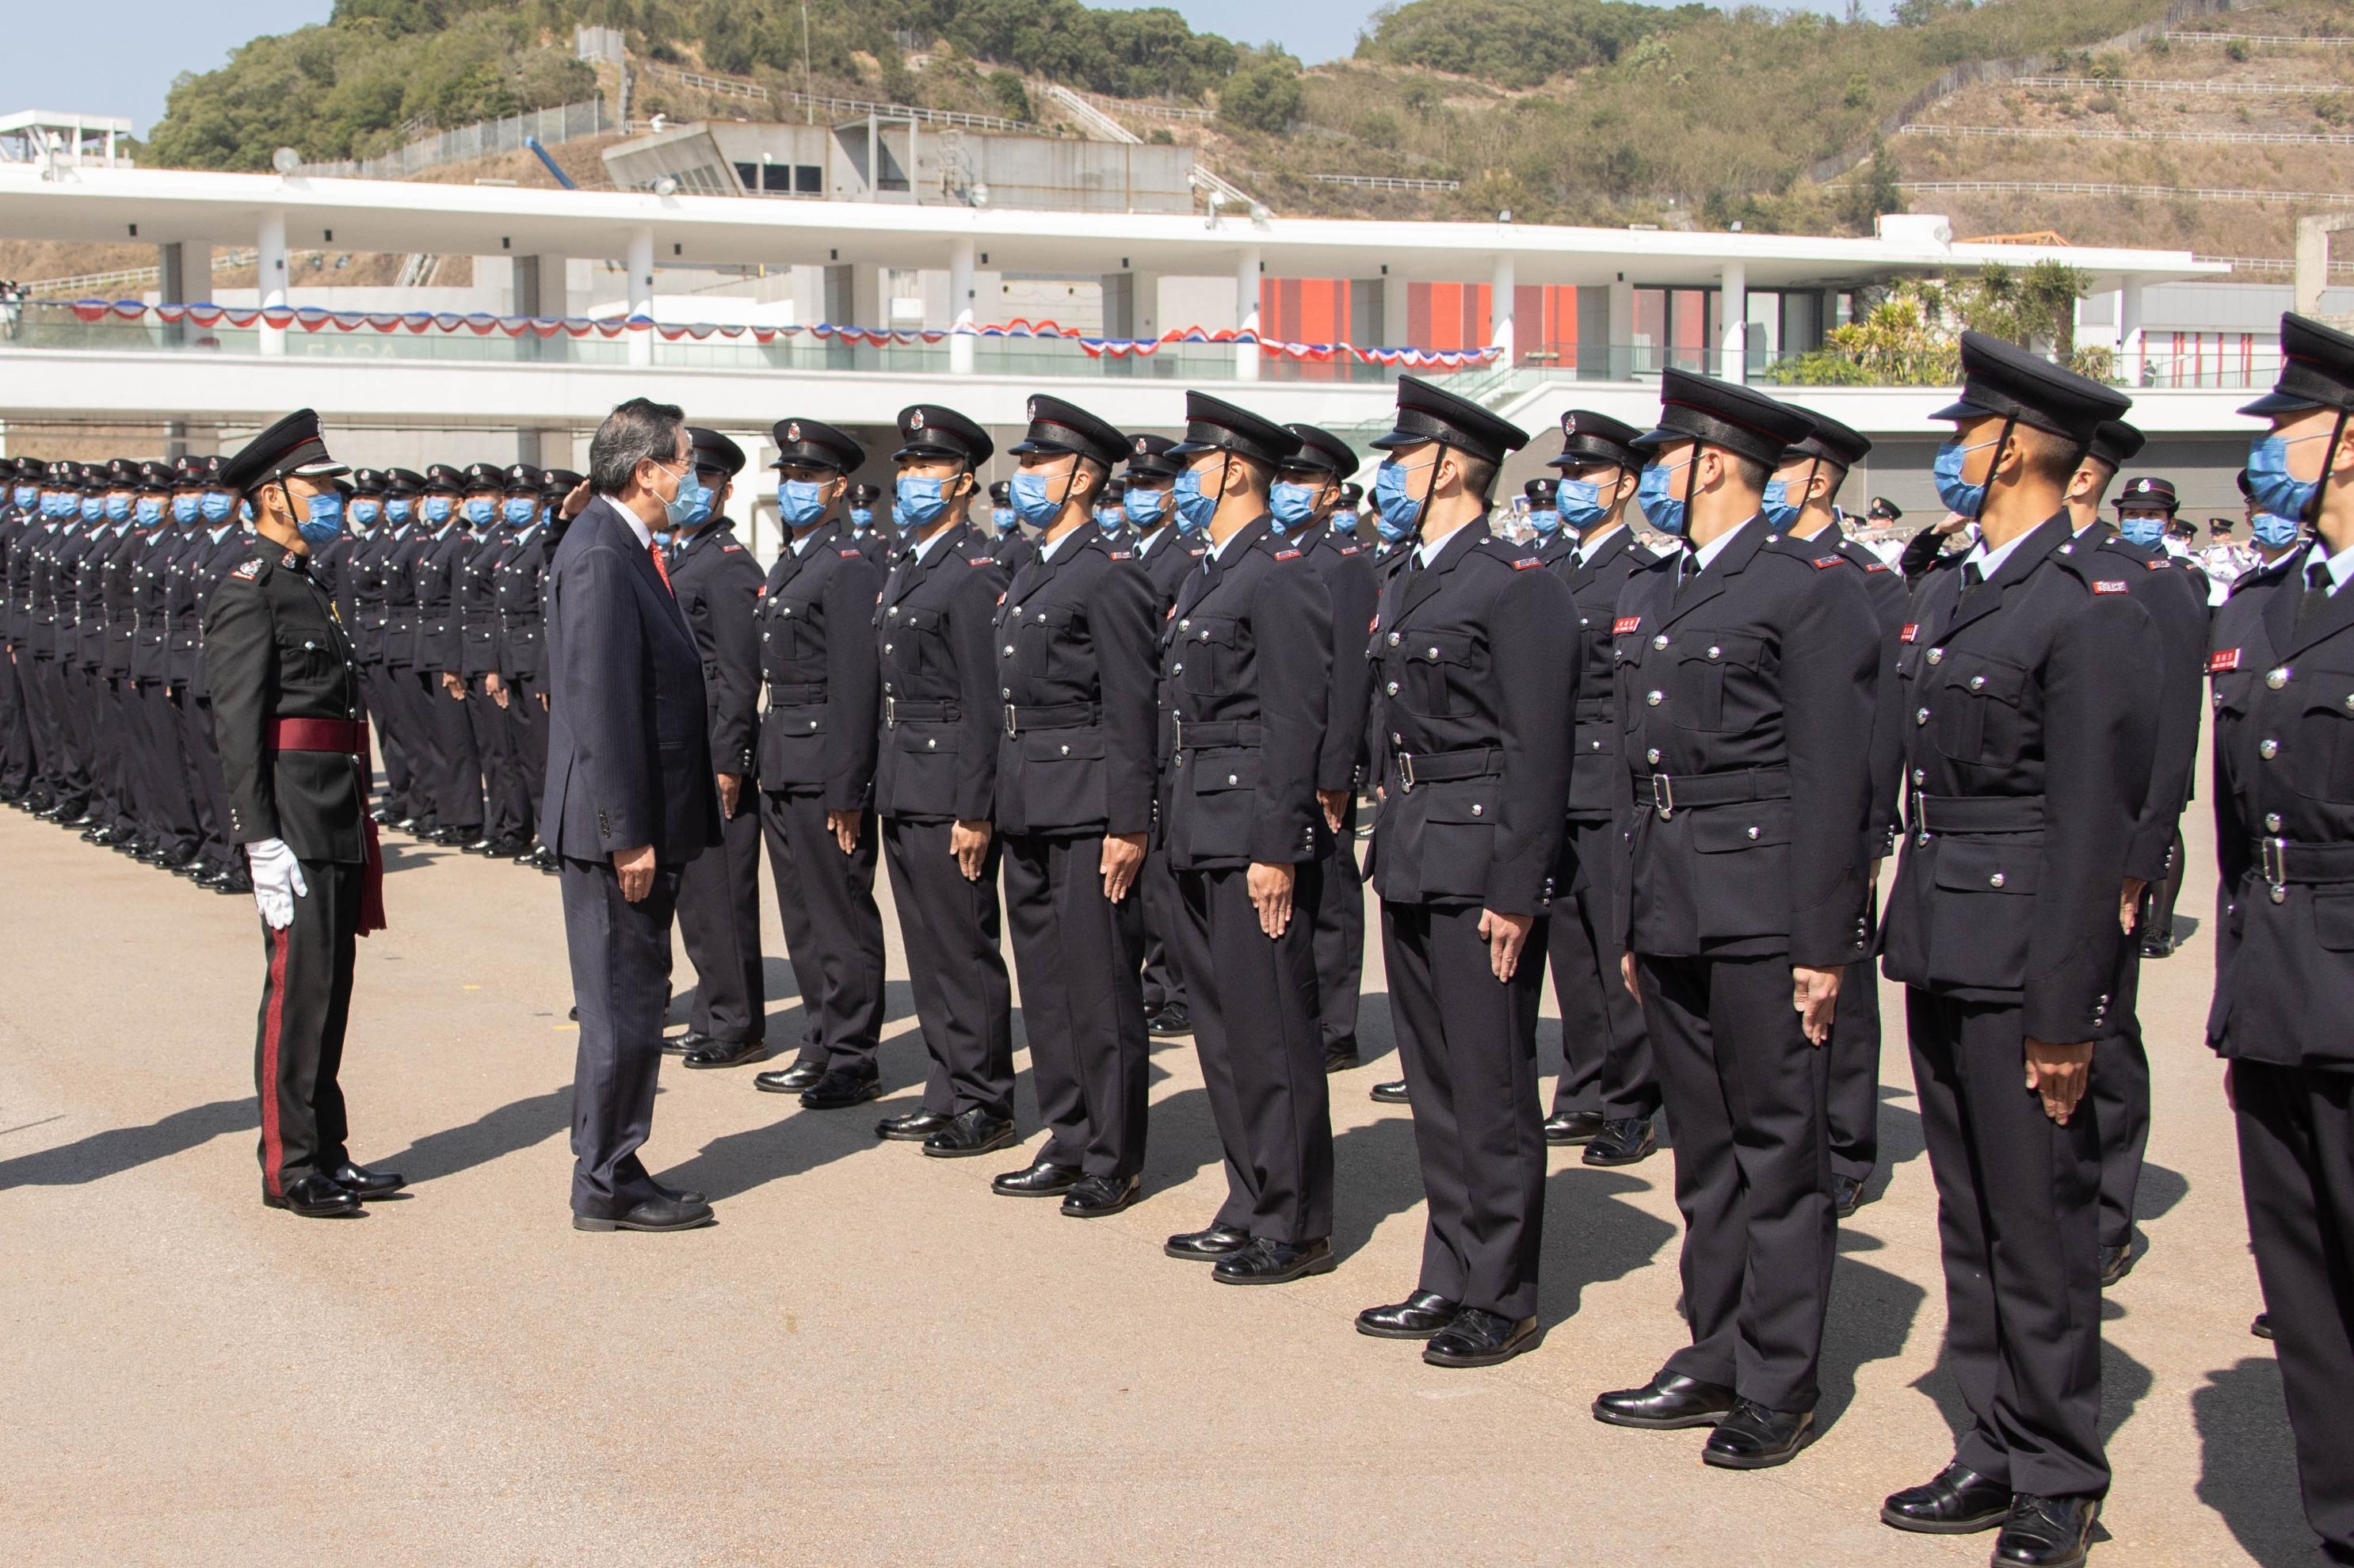 The President of Legislative Council, Mr Andrew Leung, reviewed the Fire Services passing-out parade at the Fire and Ambulance Services Academy today (February 17).